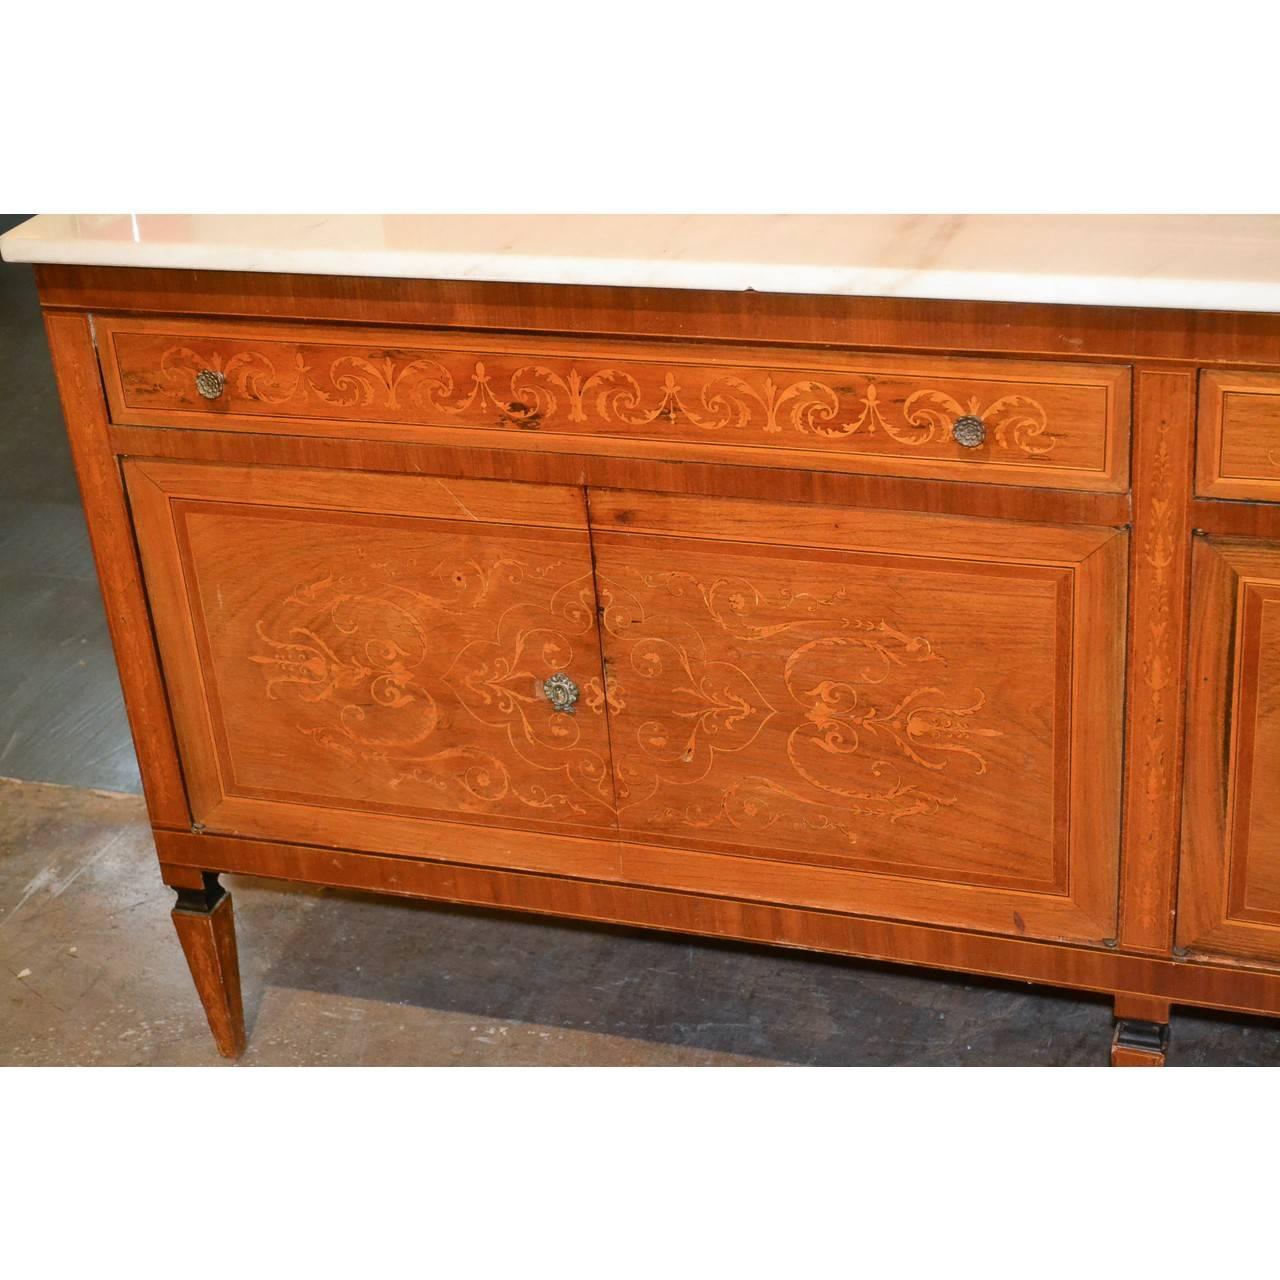 20th Century Italian Marquetry Inlaid Credenza or Sideboard